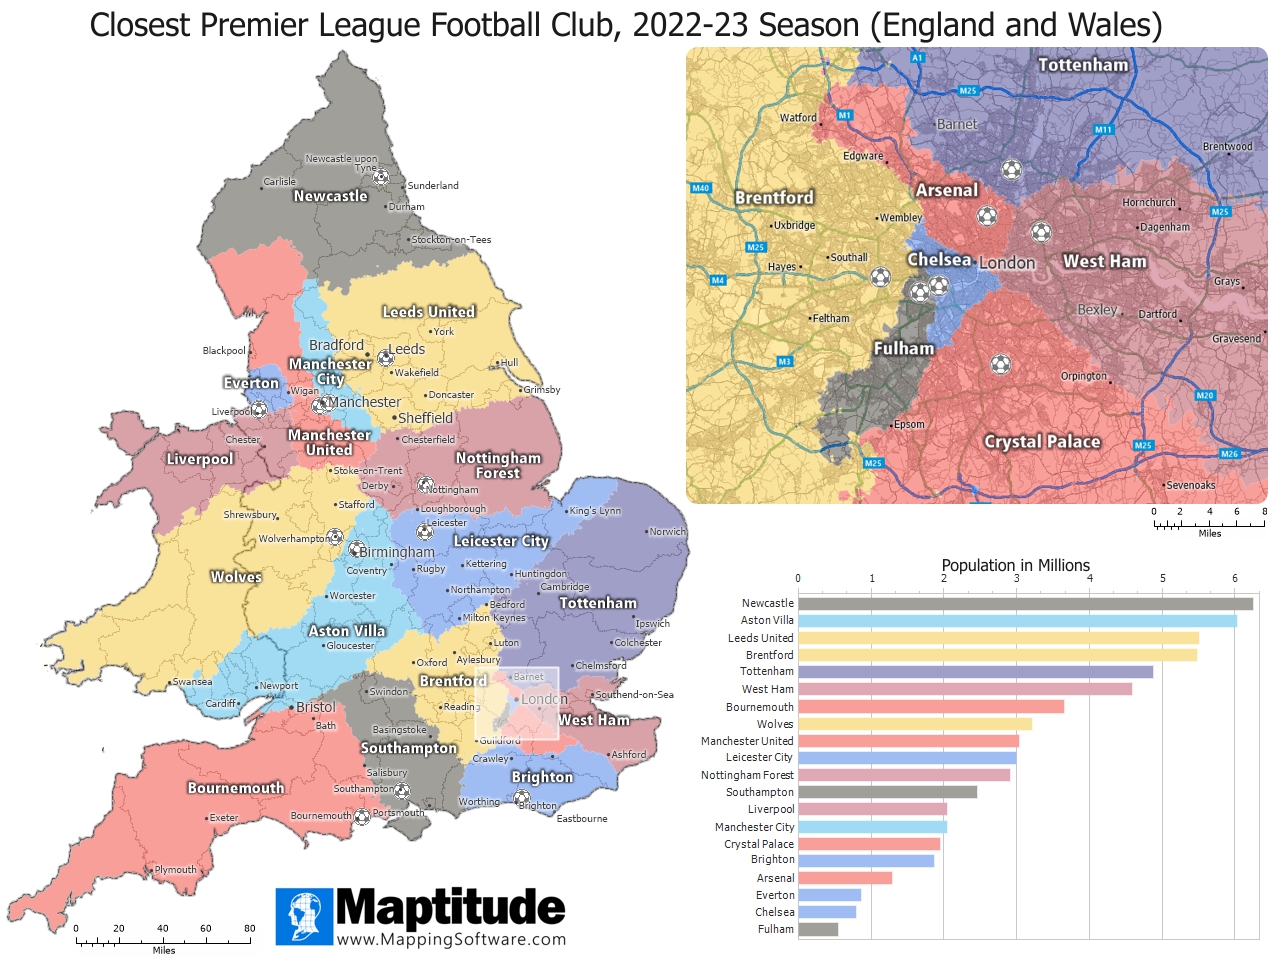 Maptitude mapping software infographic of Closest Premier League Football Club